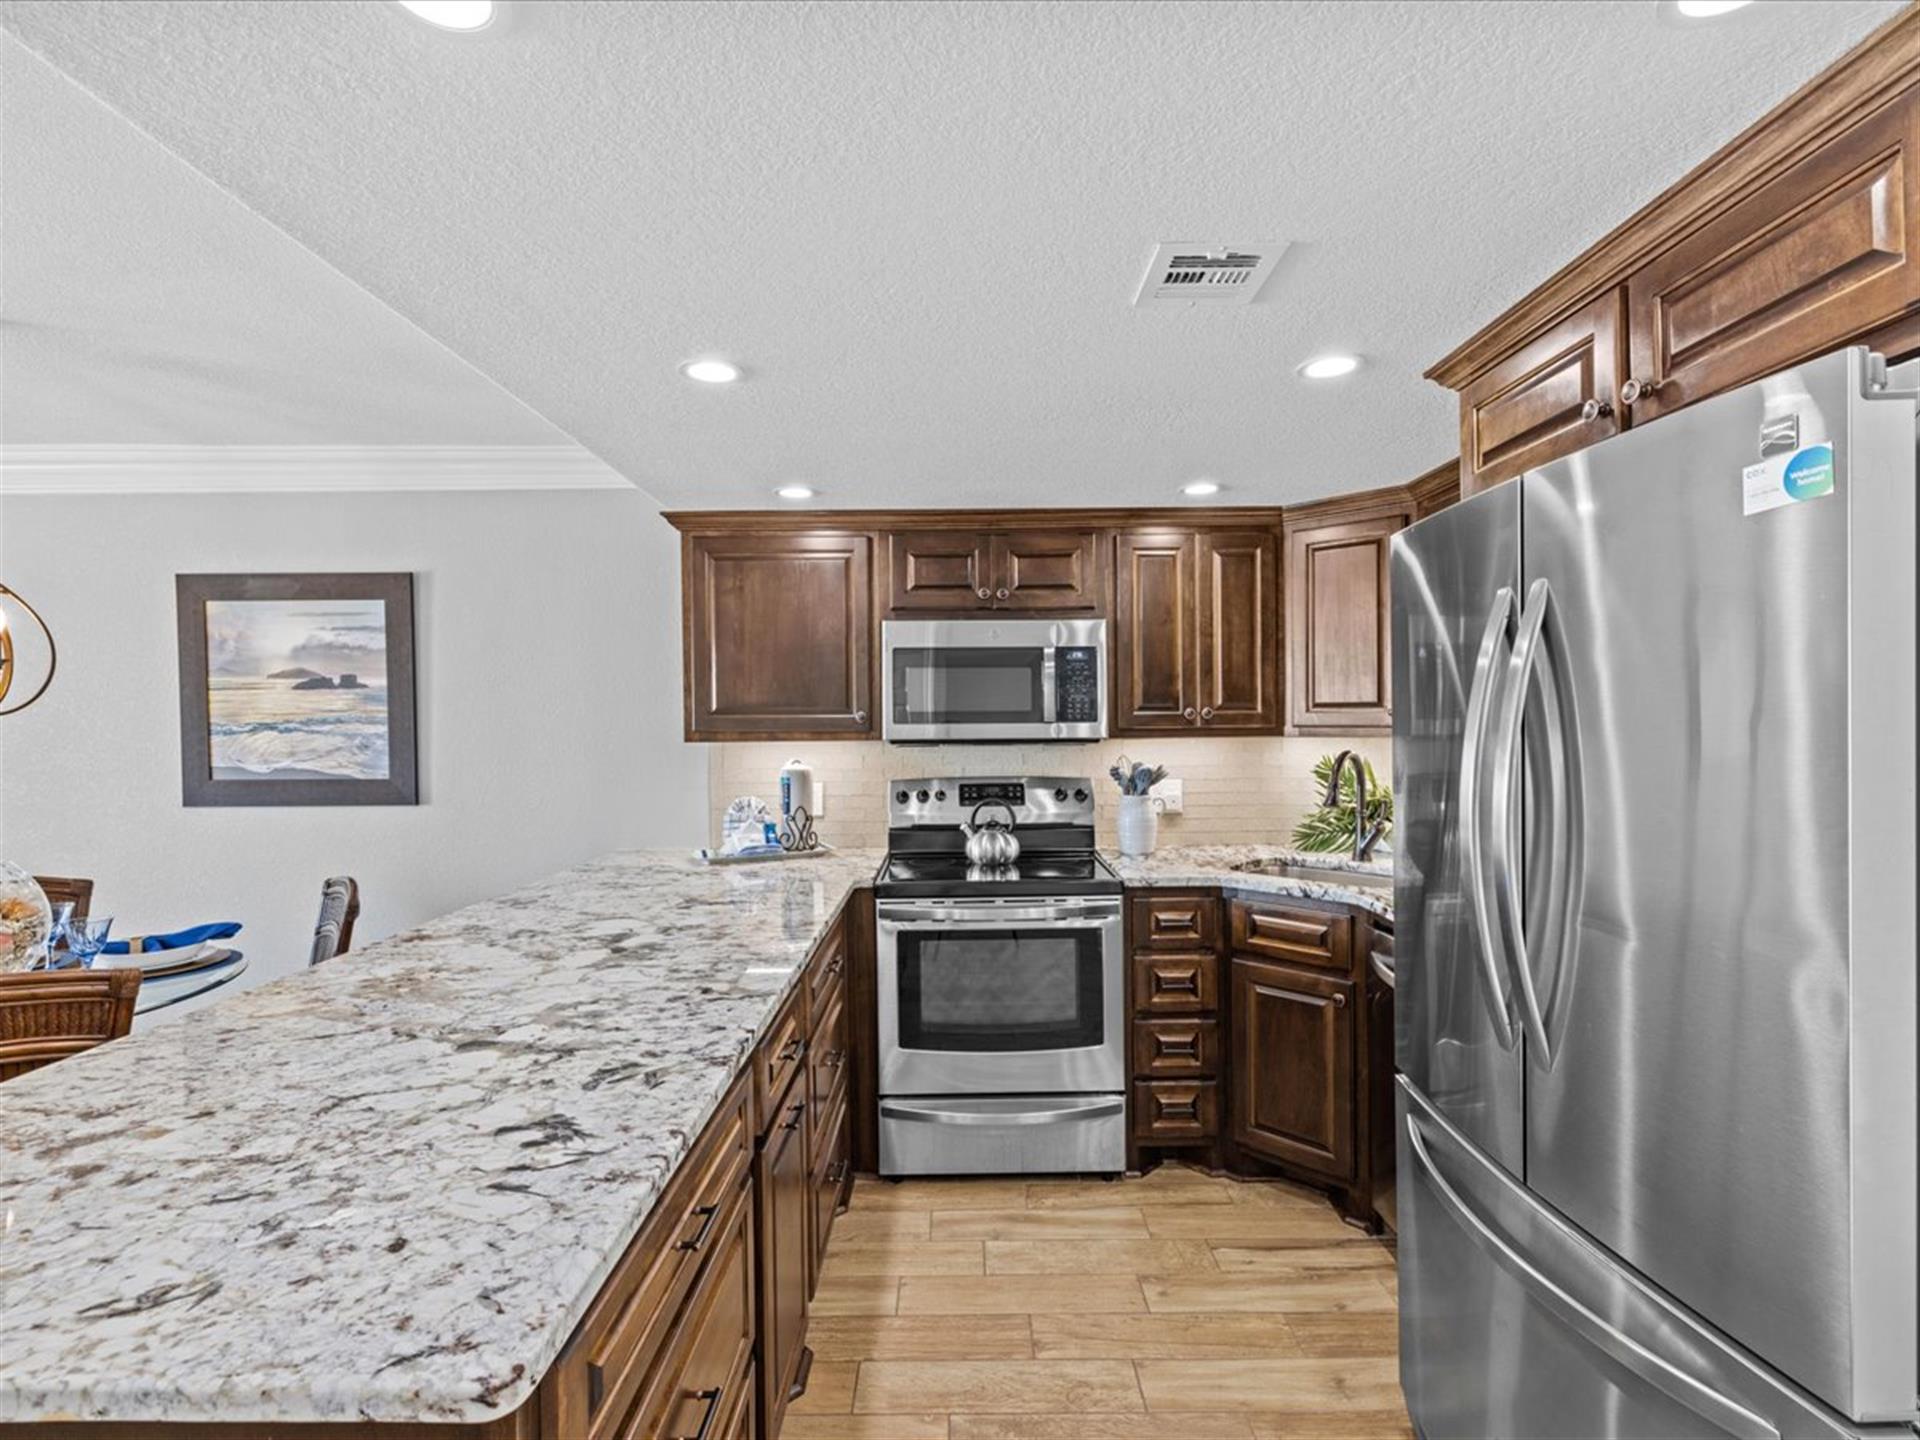 HSRC 522 Kitchen With Stainless Steel Appliances